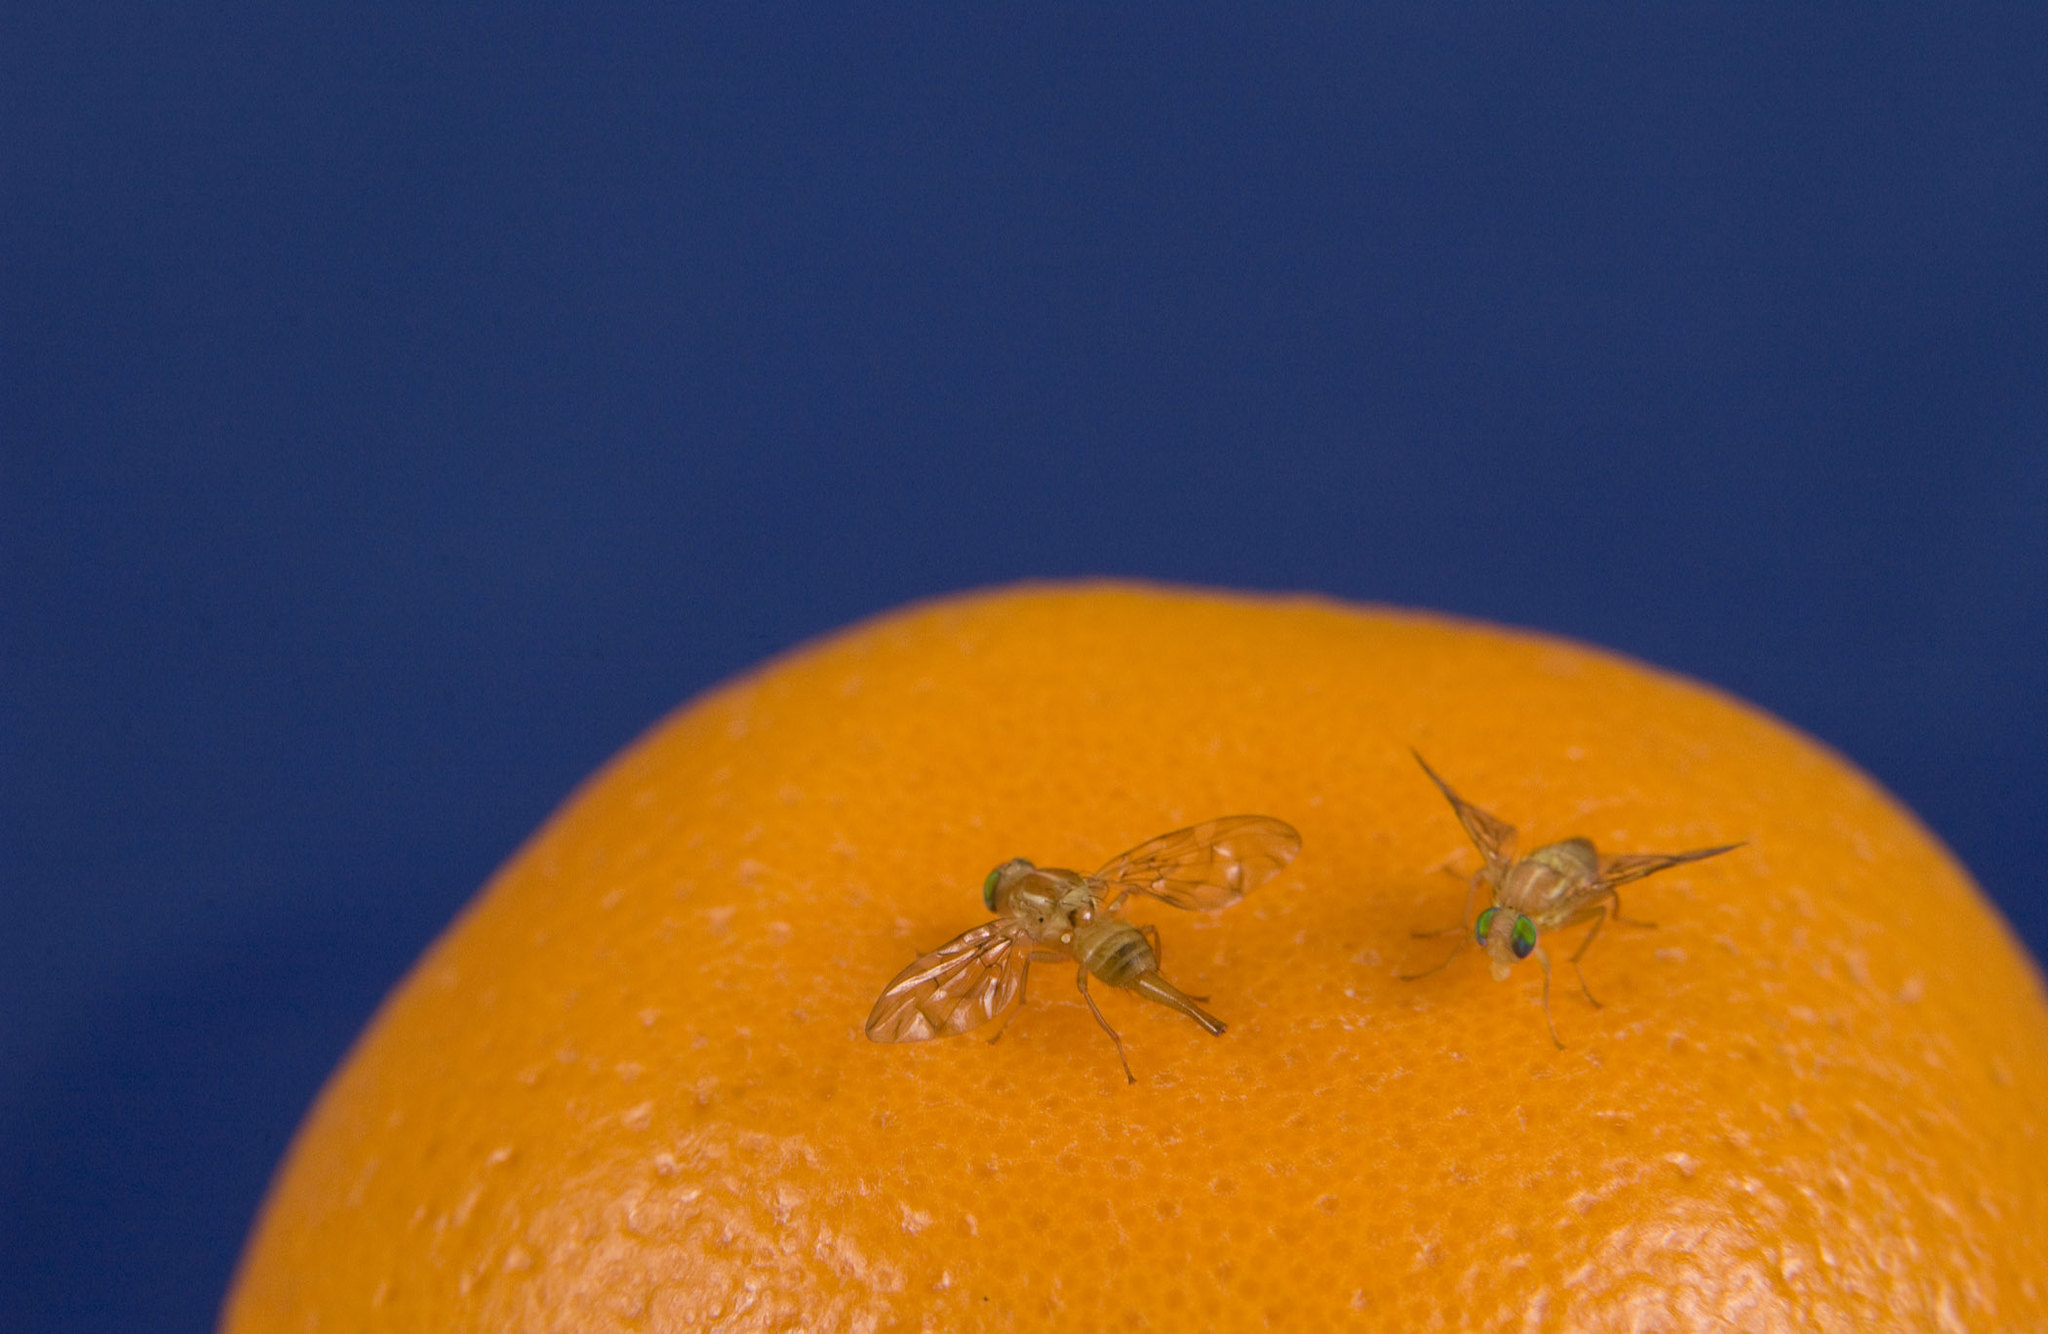 How to (Actually) Get Rid of Fruit Flies - Modern Farmer